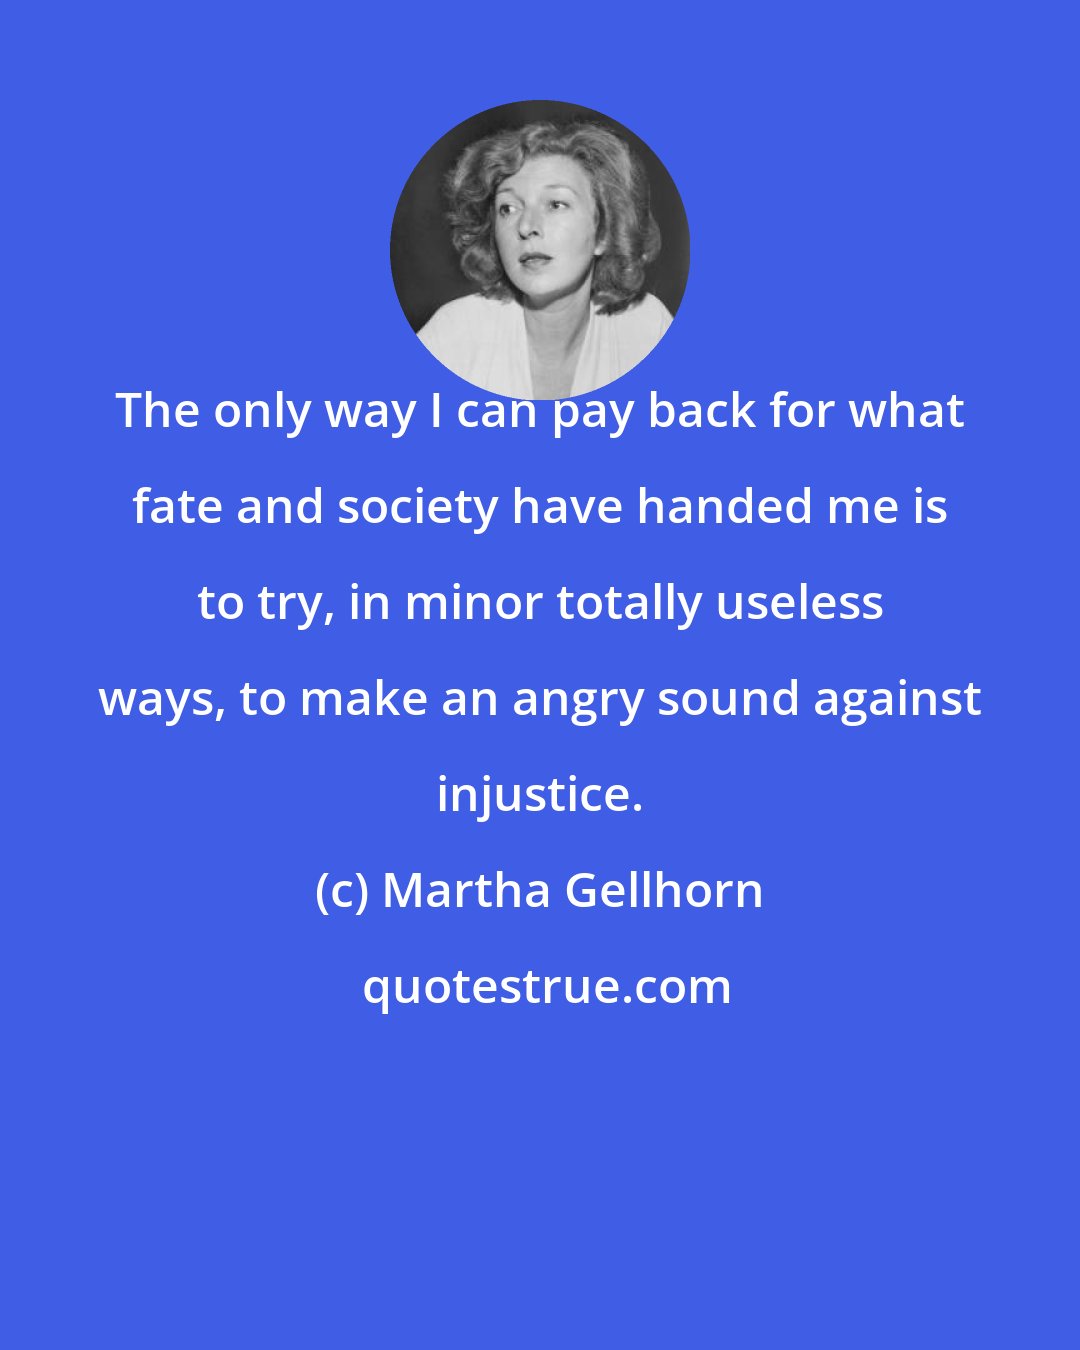 Martha Gellhorn: The only way I can pay back for what fate and society have handed me is to try, in minor totally useless ways, to make an angry sound against injustice.